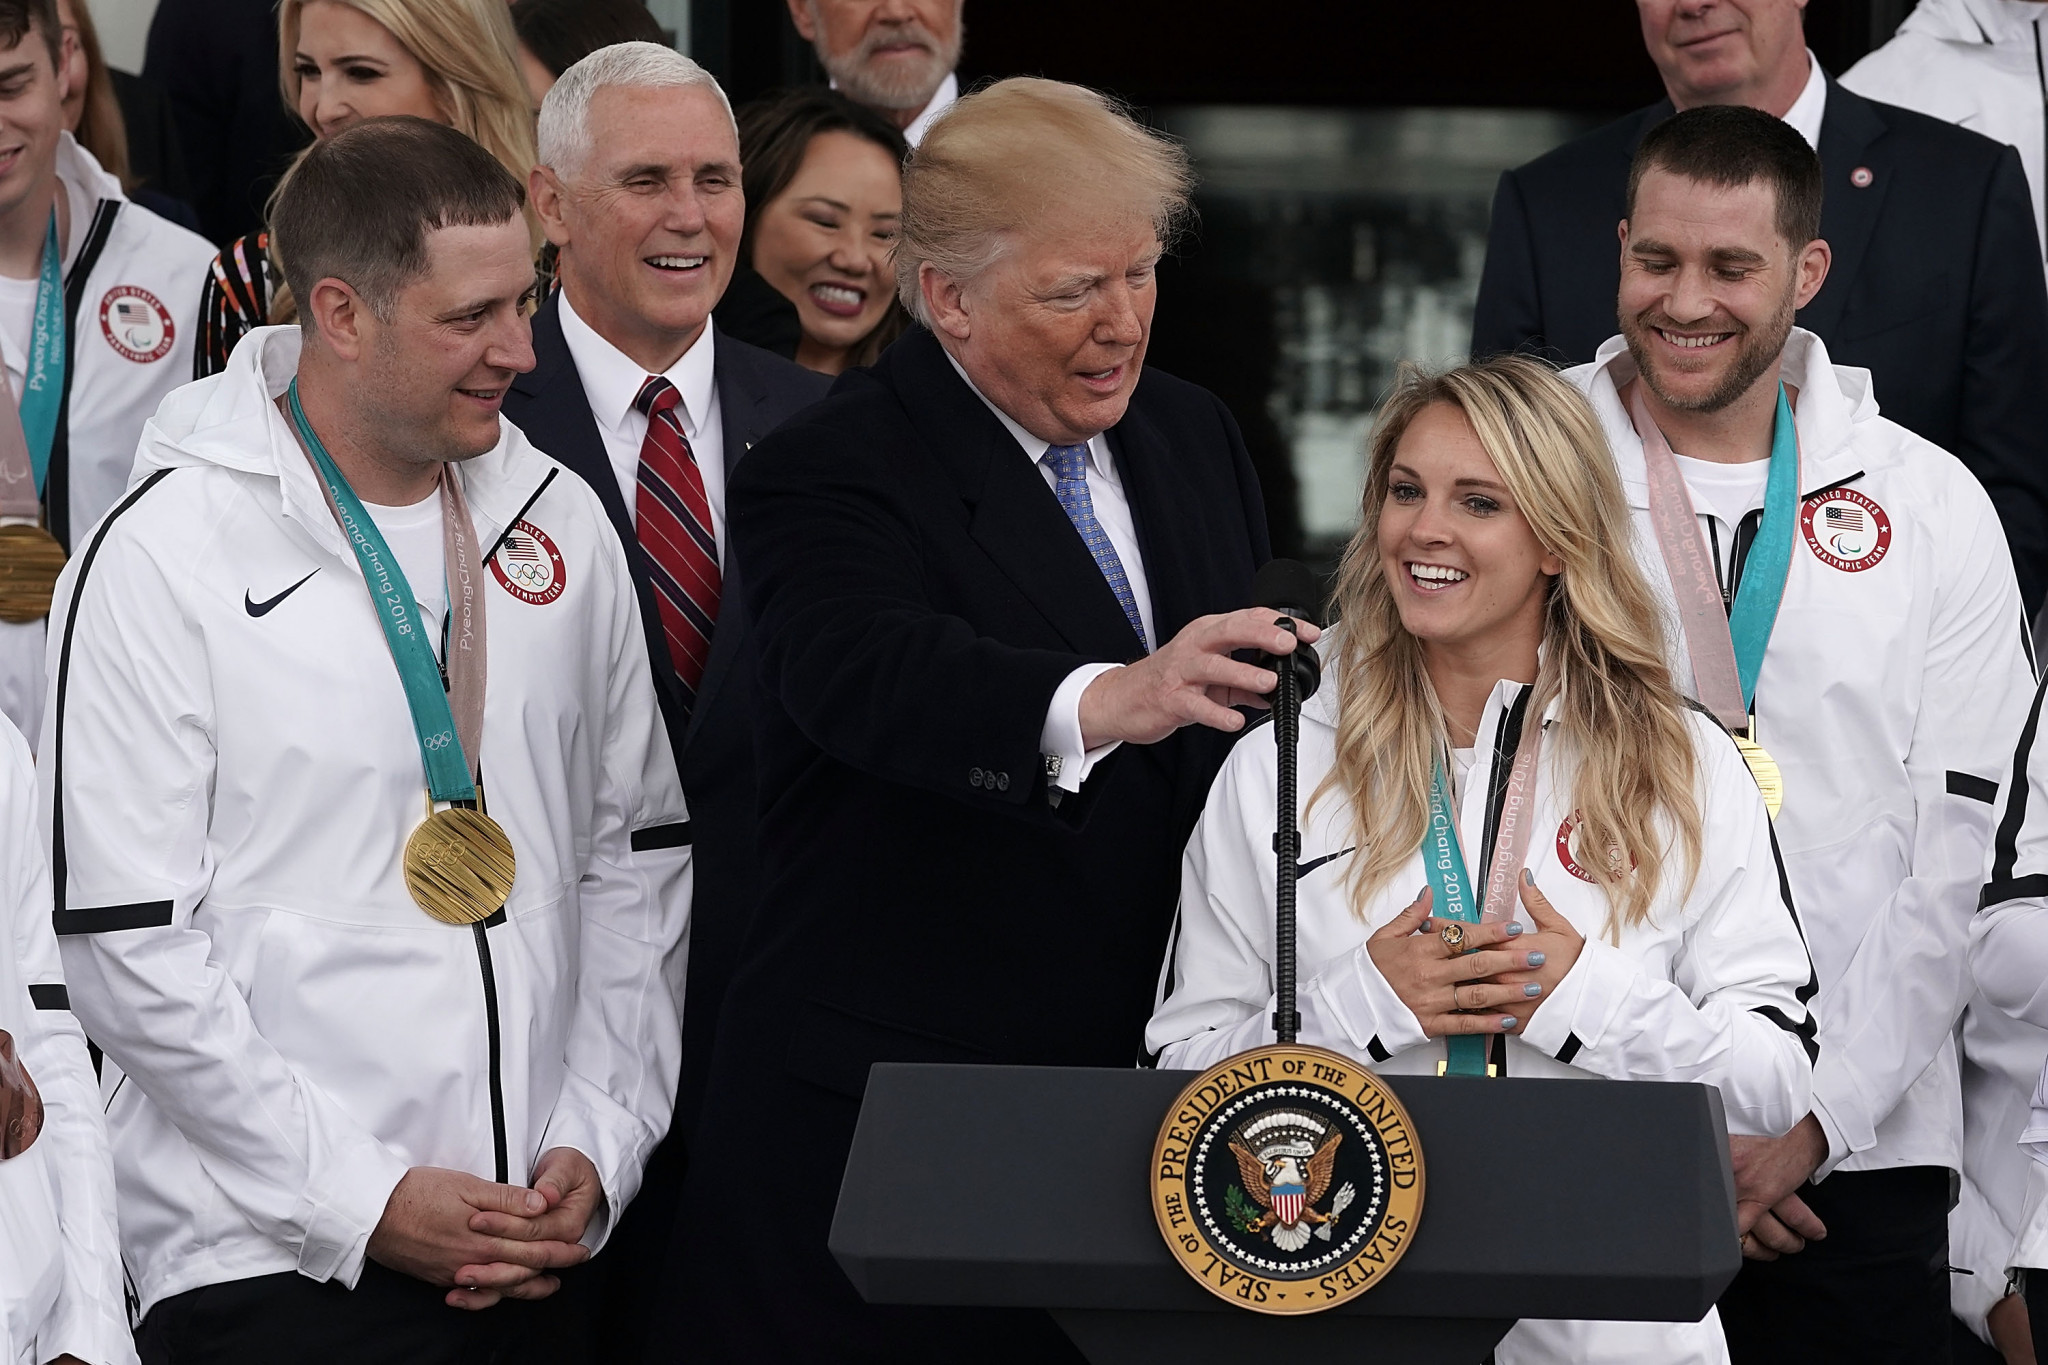 American President Donald Trump, pictured with members of the United States Pyeongchang 2018 teams at the White House, was among many to claim credit for the breakthrough in relations between North and South Korea ©Getty Images